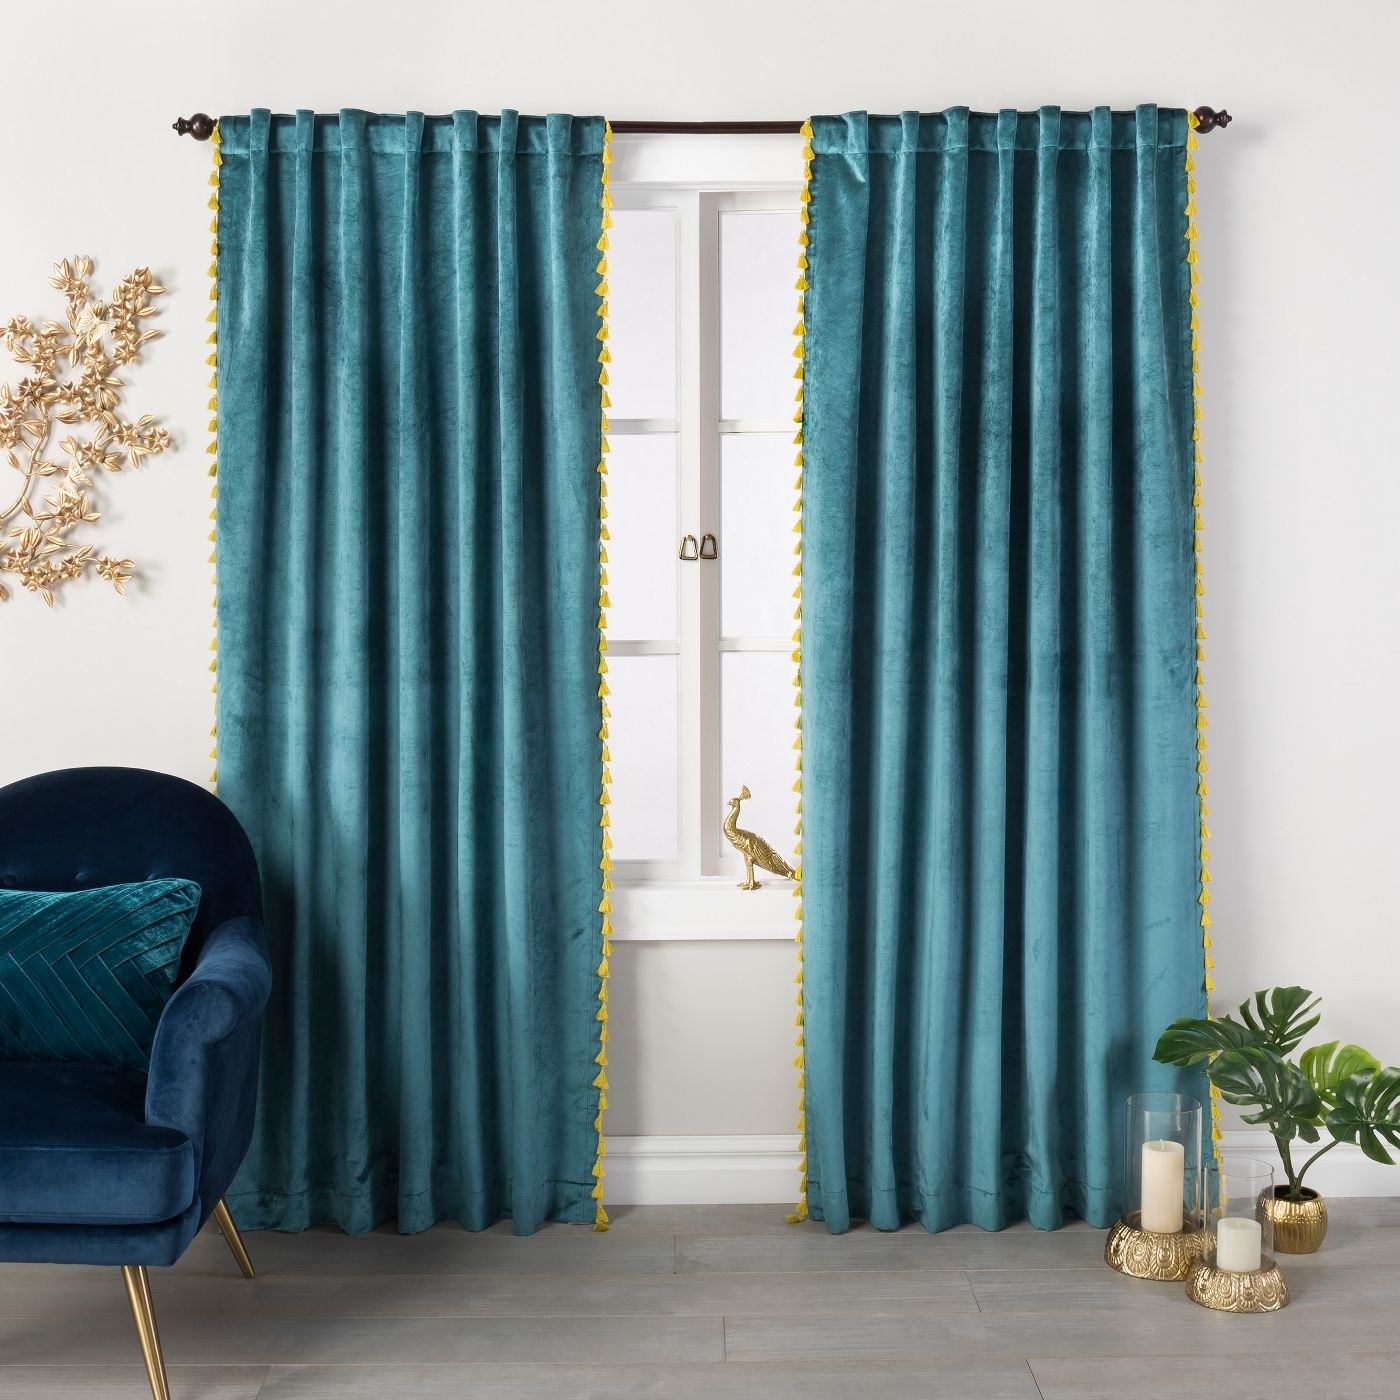 Teal velvet curtain panel with chartreuse tassels 